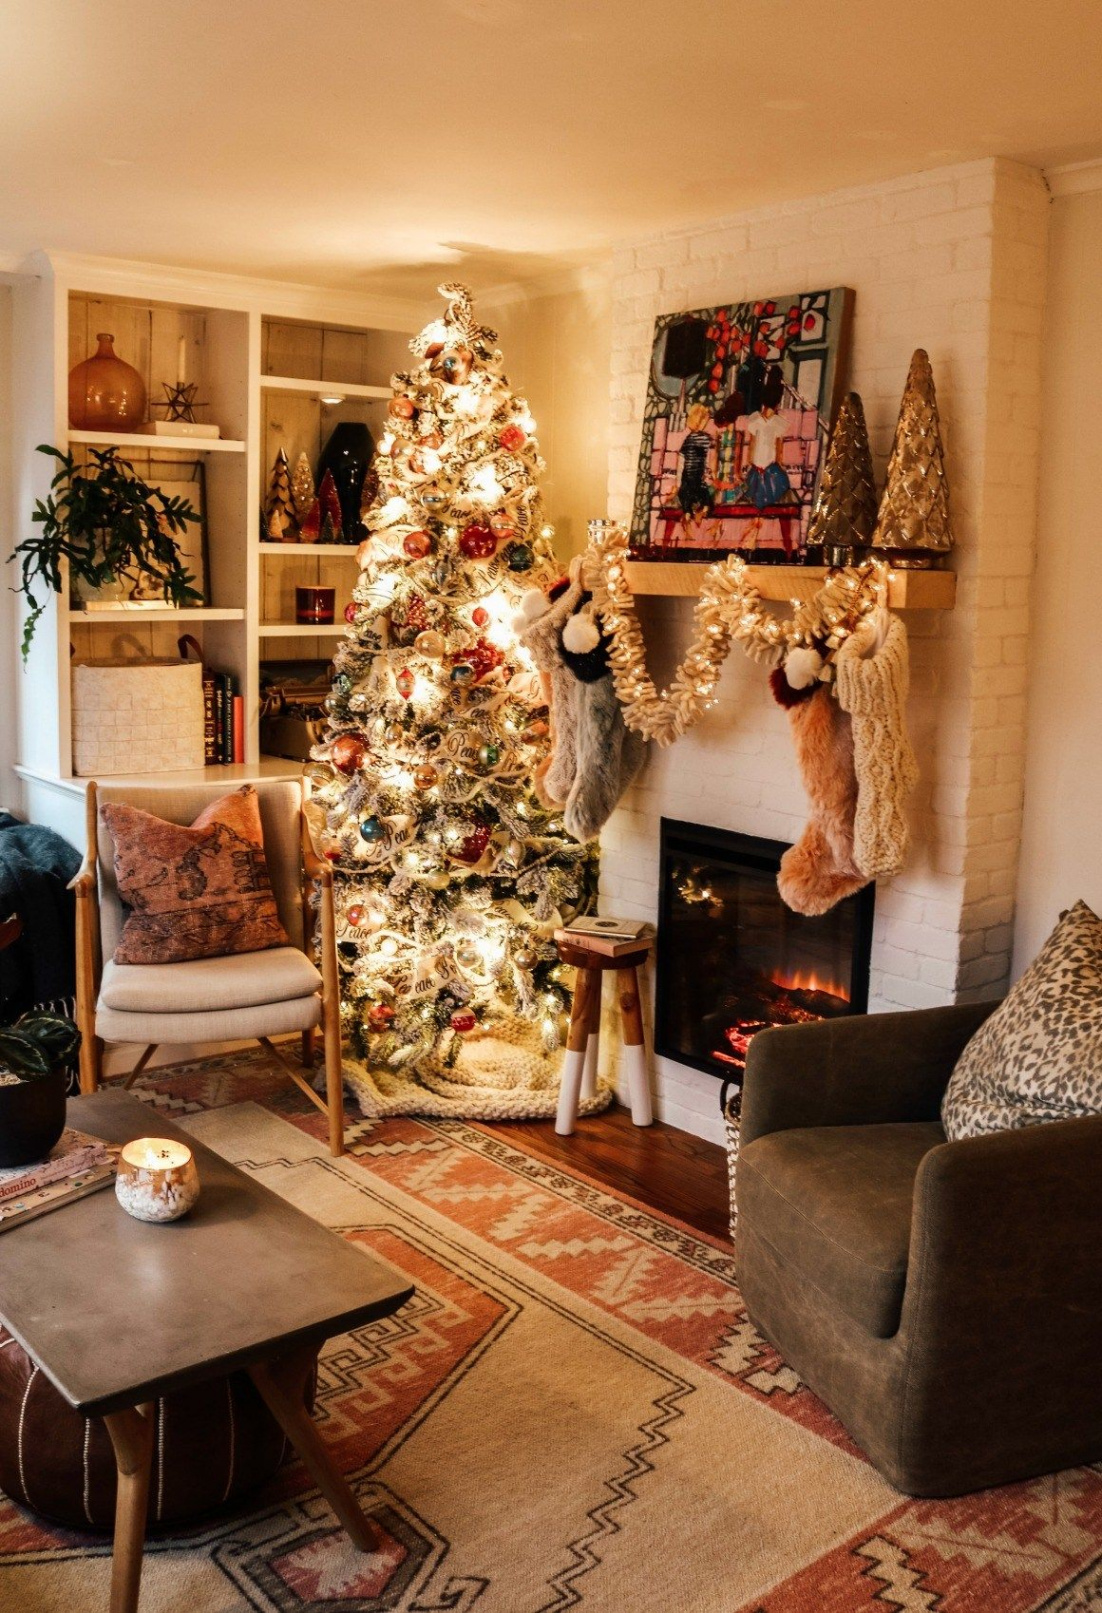 Cozy Christmas Vibes: Get inspired by vintage and rustic holiday